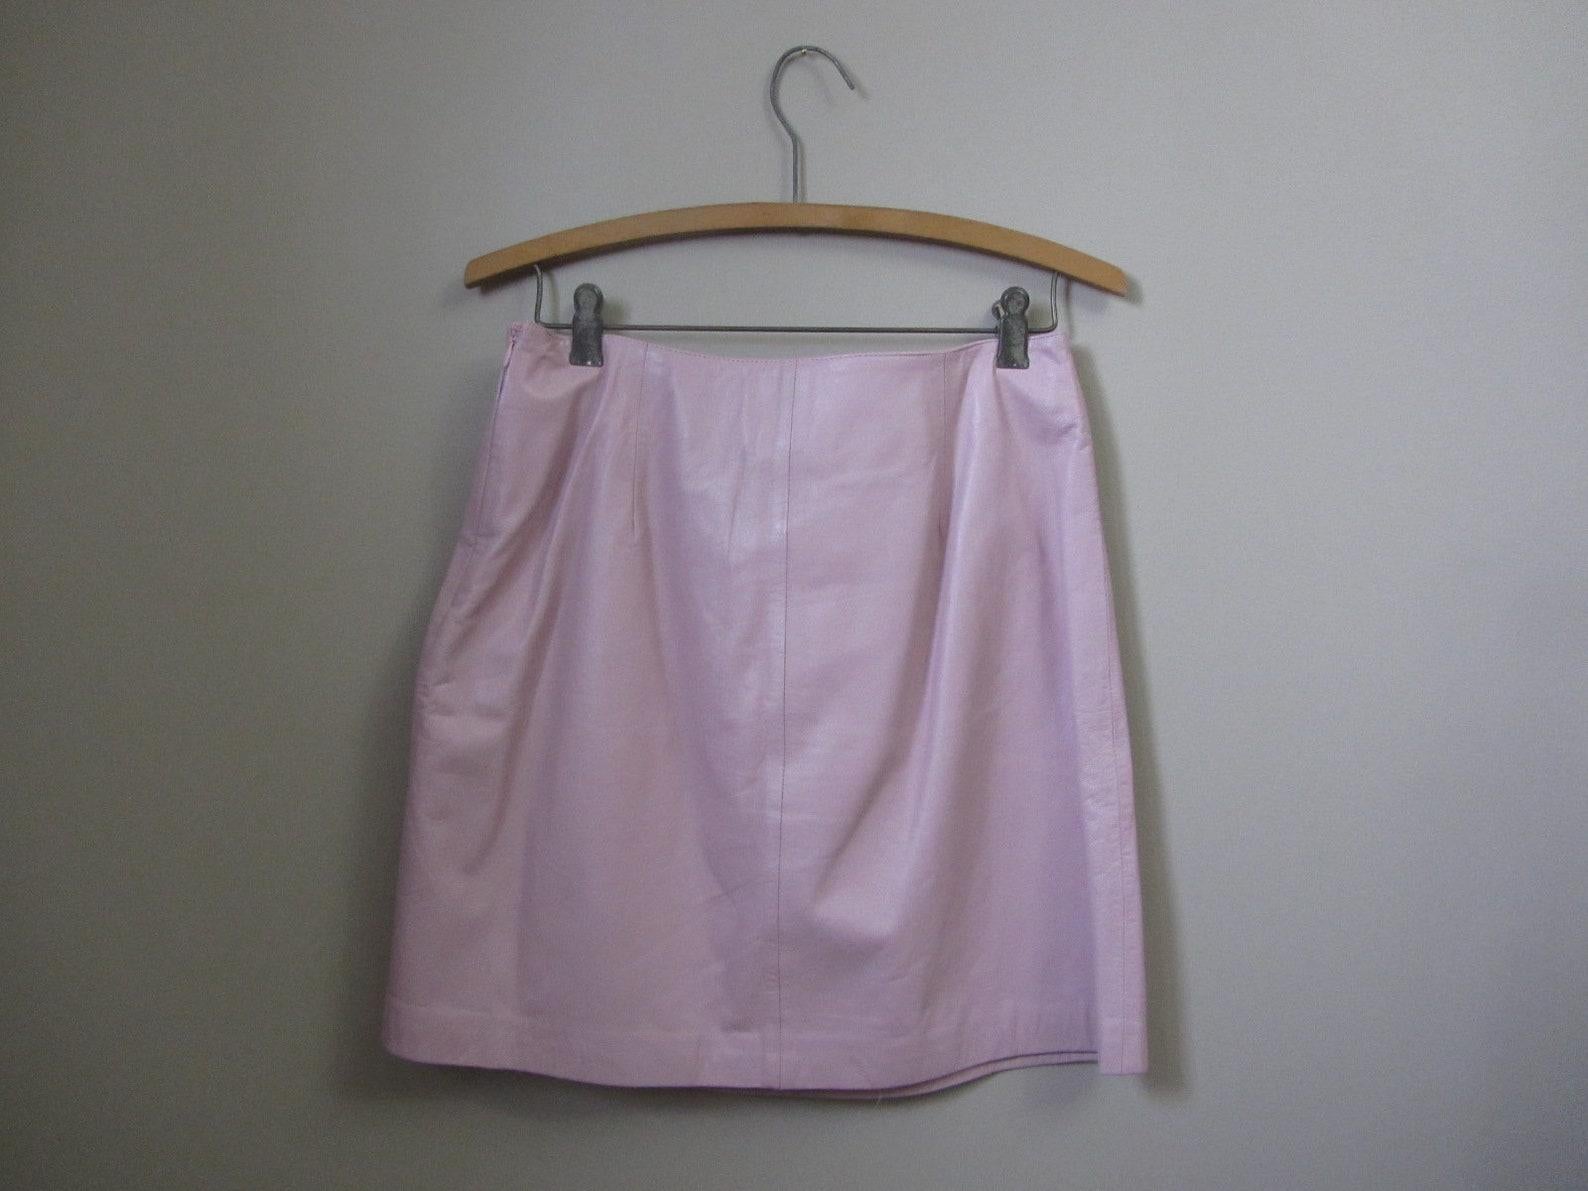 Versus Versace Pink Leather Mini Skirt For Sale 5